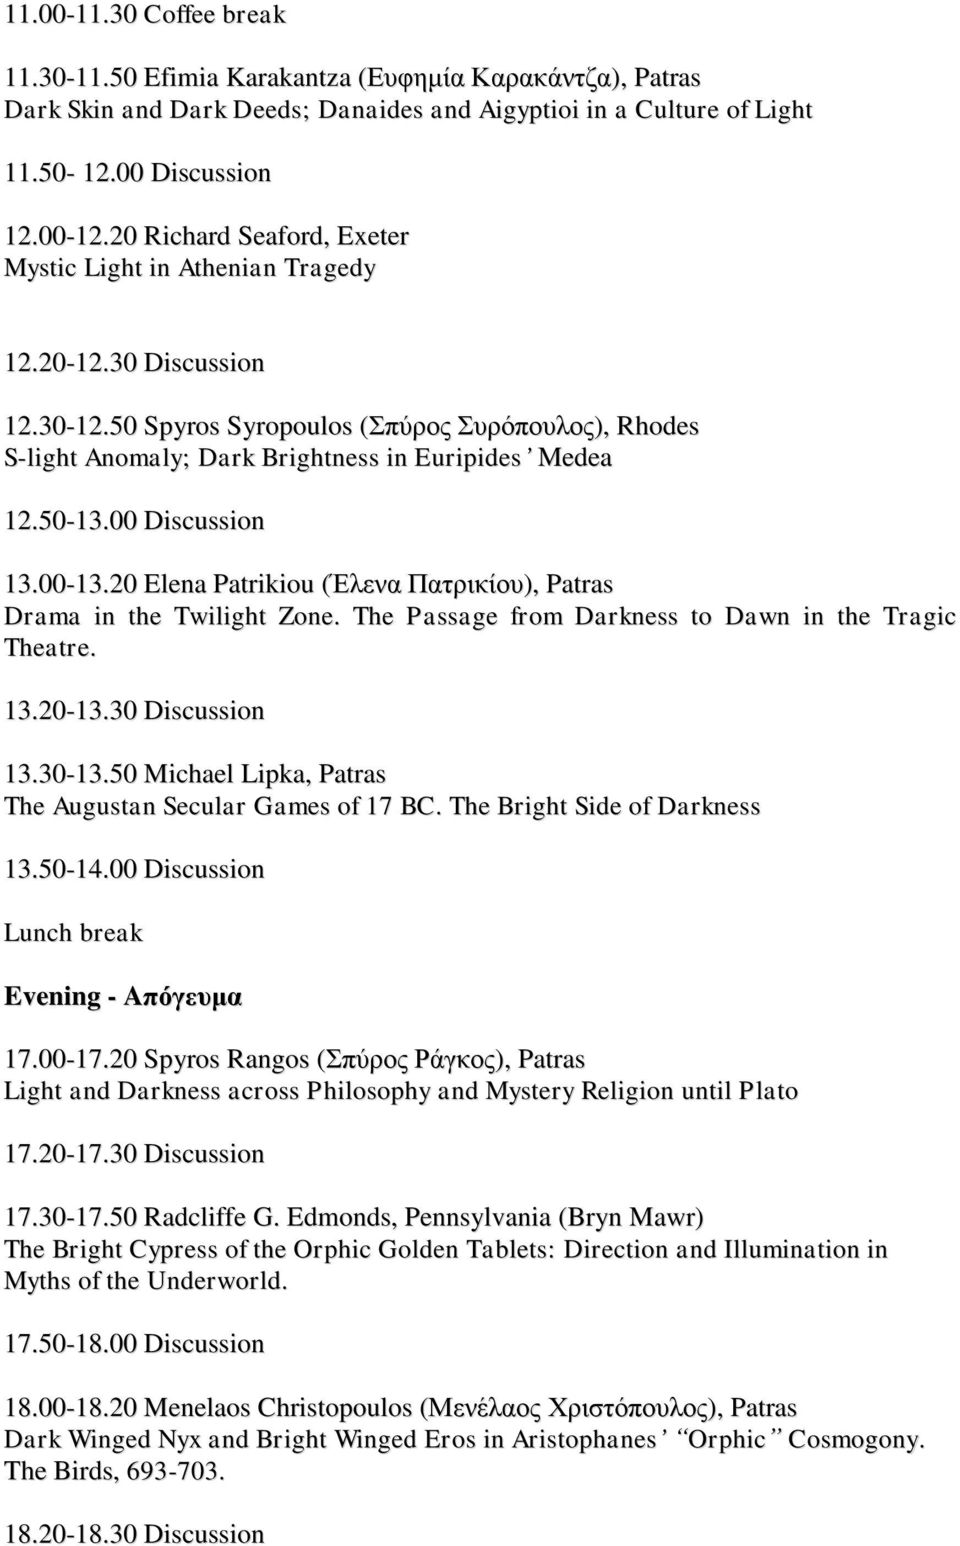 00 Discussion 13.00-13.20 Elena Patrikiou (Έιελα Παηξηθίνπ), Patras Drama in the Twilight Zone. The Passage from Darkness to Dawn in the Tragic Theatre. 13.20-13.30 Discussion 13.30-13.